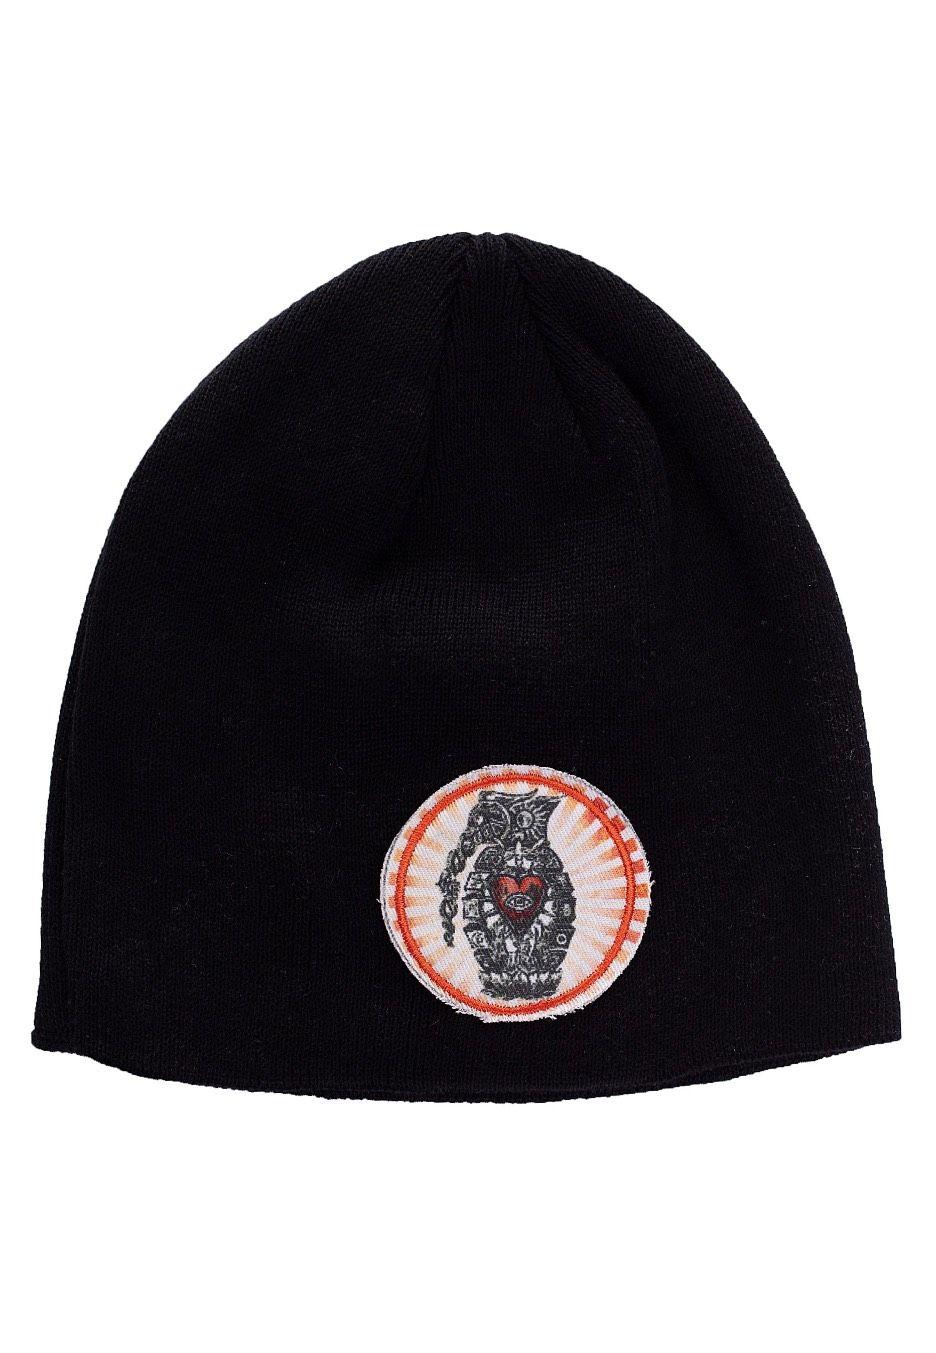 Incubus Logo - Incubus - Logo - Beanie - Official Indie Merchandise Shop ...